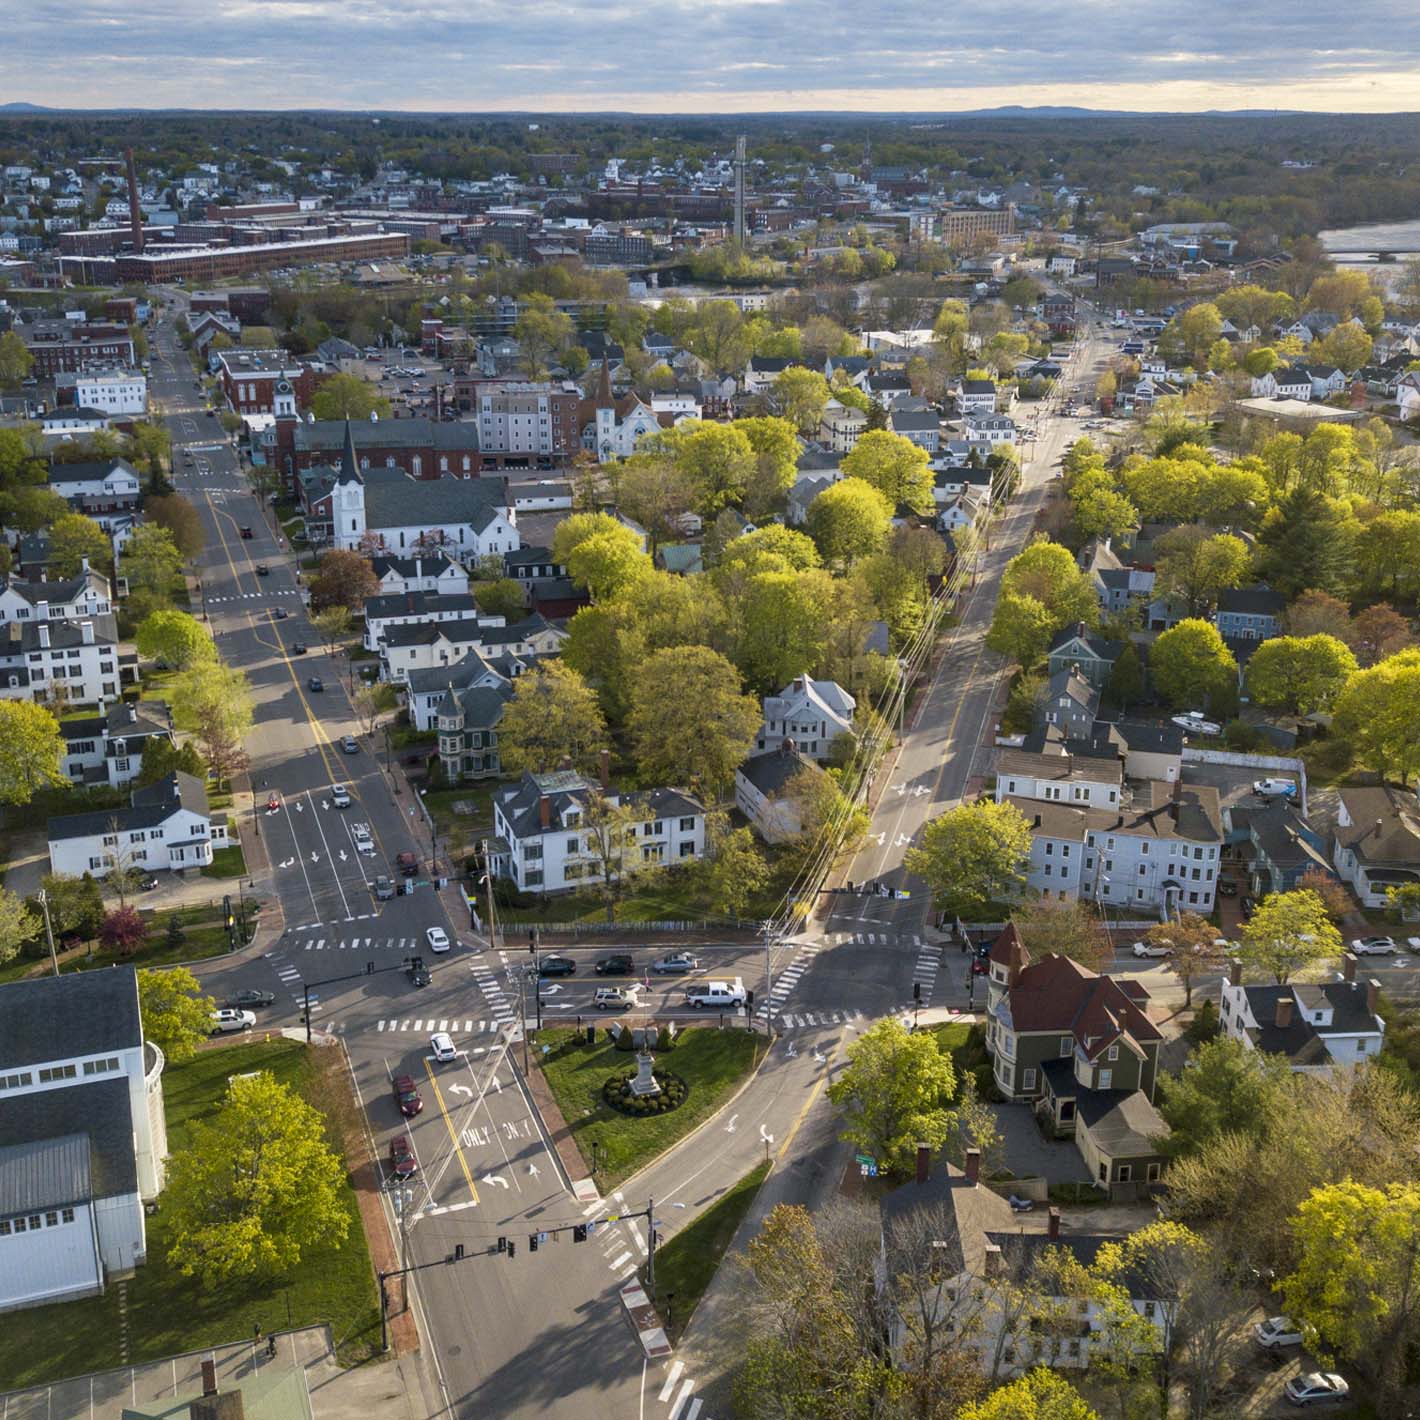 aerial view of the City of Saco